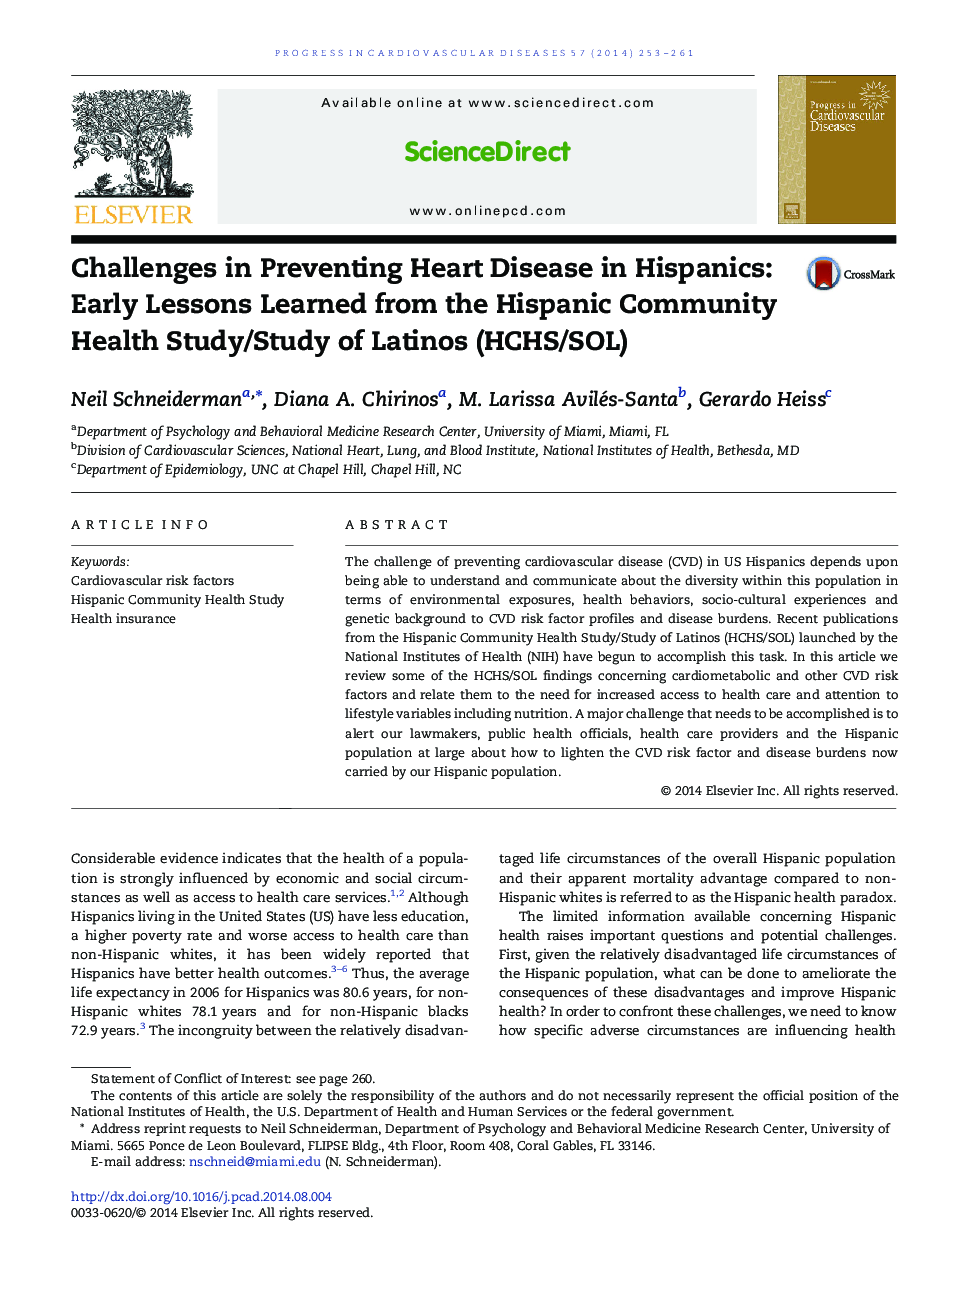 Challenges in Preventing Heart Disease in Hispanics: Early Lessons Learned from the Hispanic Community Health Study/Study of Latinos (HCHS/SOL) 